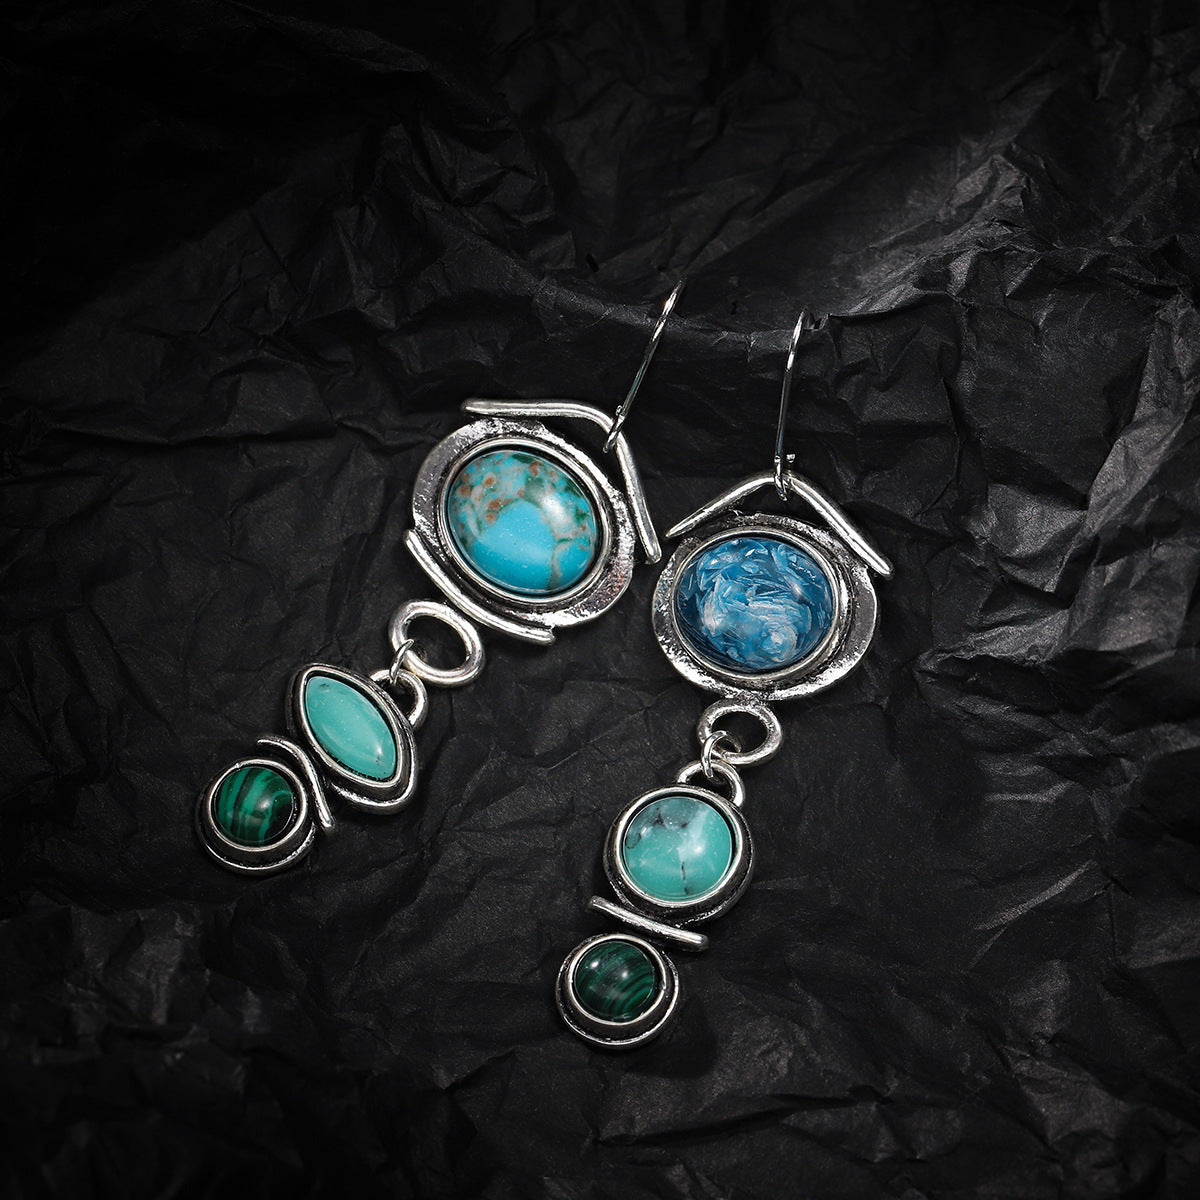 Turquoise & Crystal Silver-Plated Tiered Drop Earrings